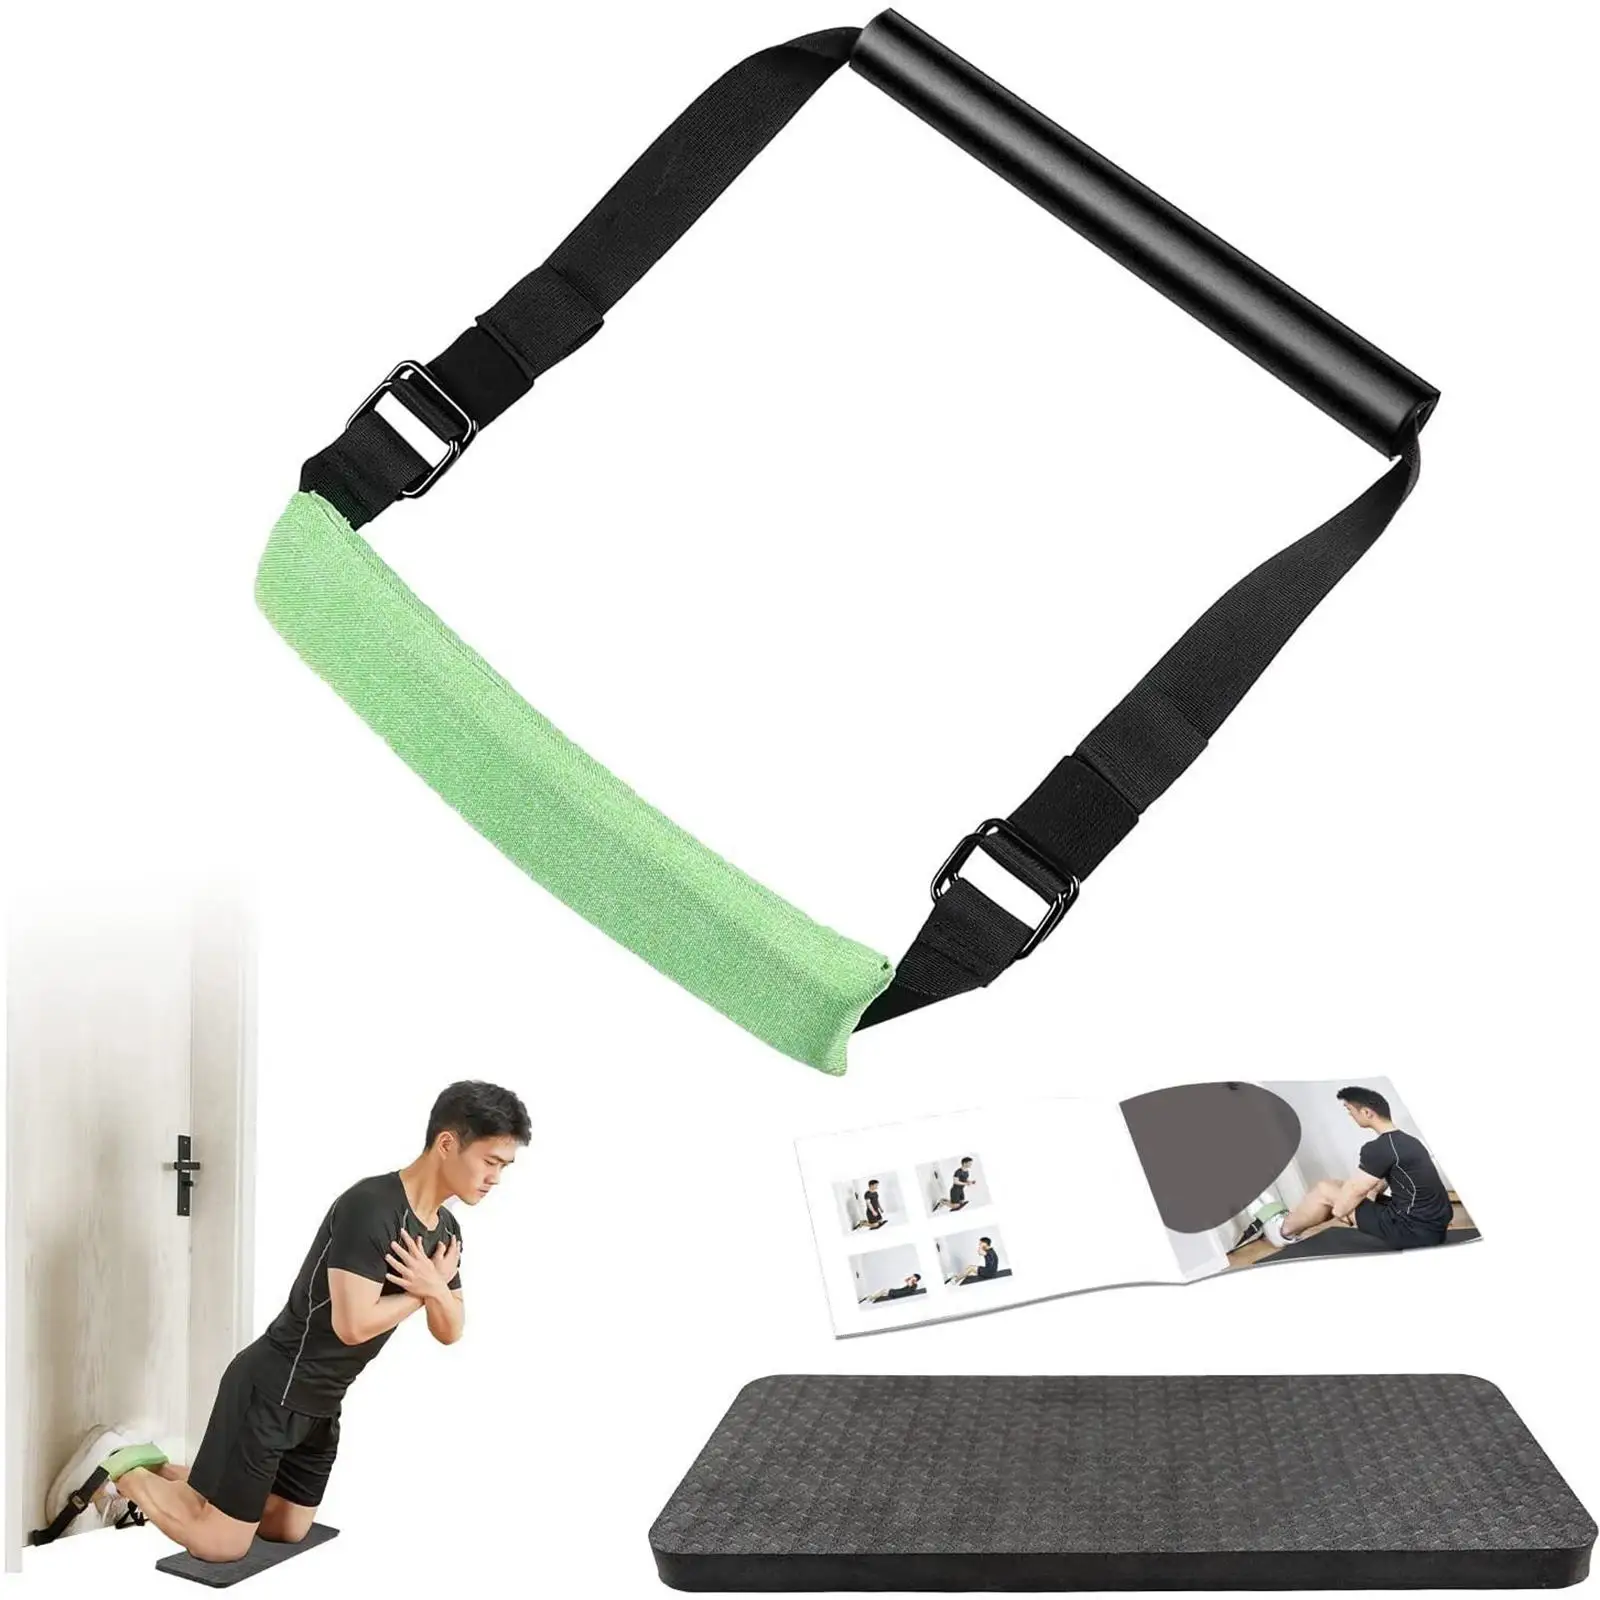 Hamstring Curl Strap Curl Ab Leg Exercise Crunches Door Anchor Abdominal Sit Up Assistant Bar for Home Gym Bodybuilding